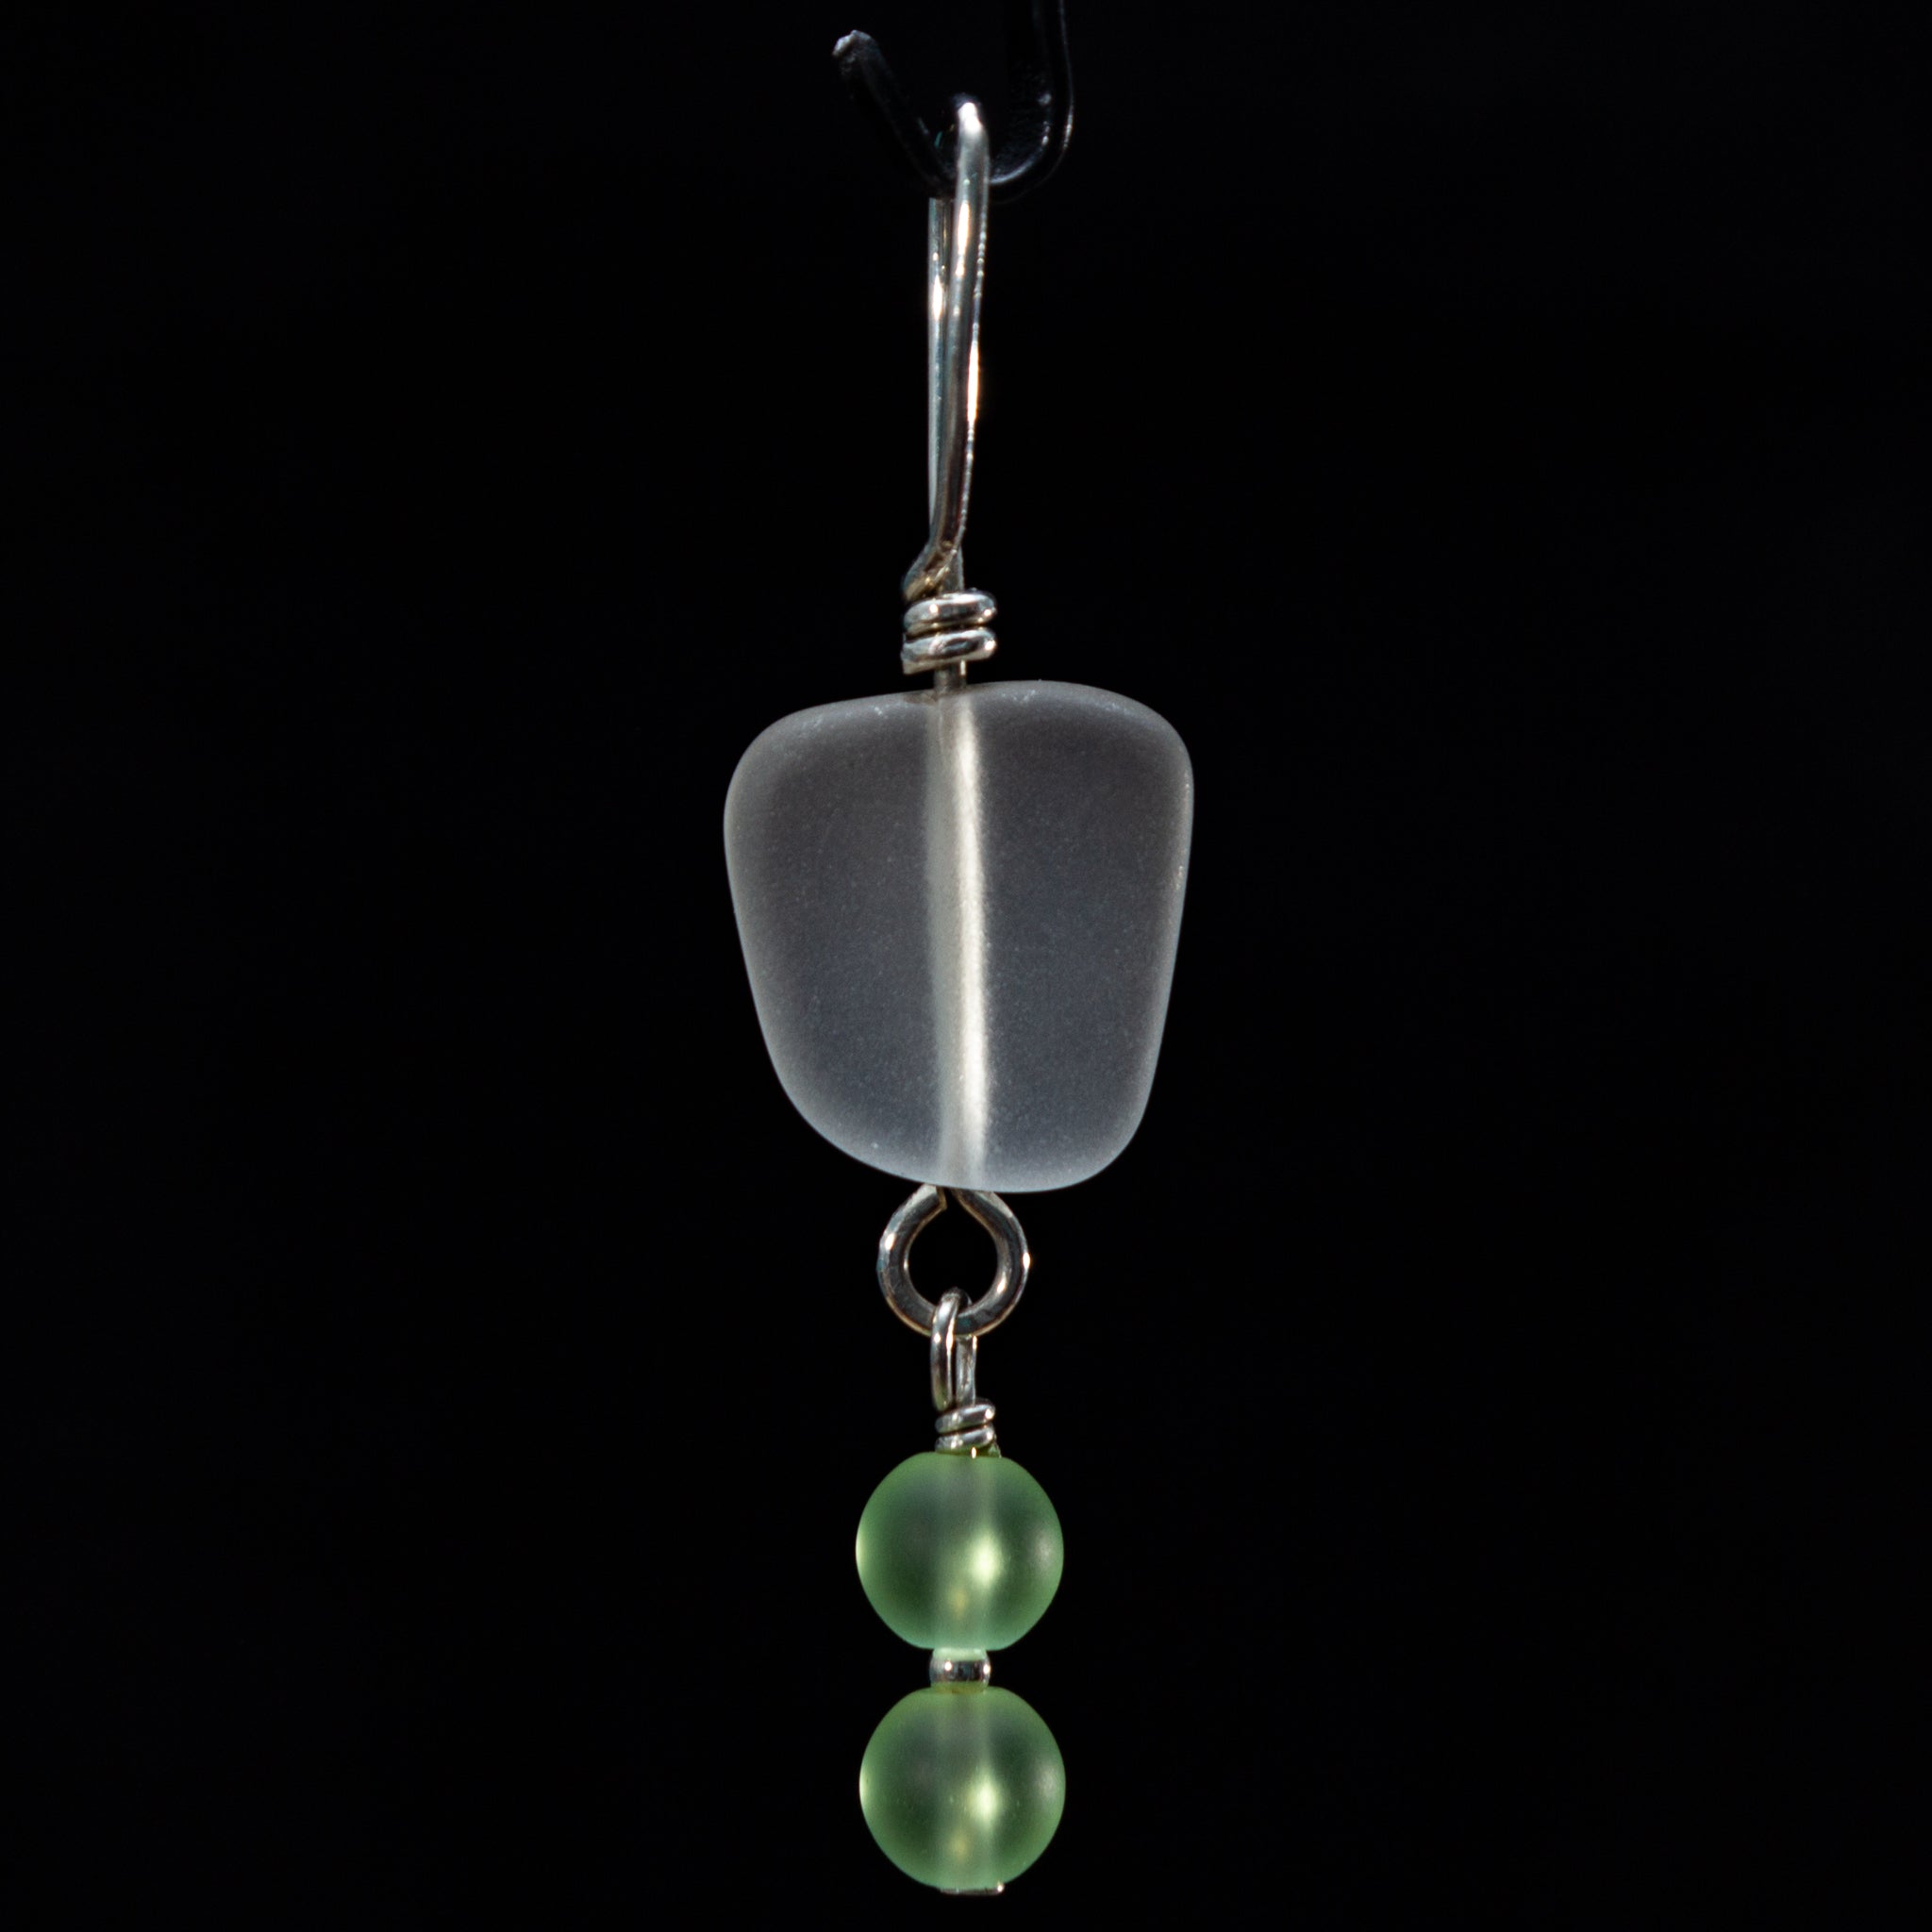 Frosted glass pendant